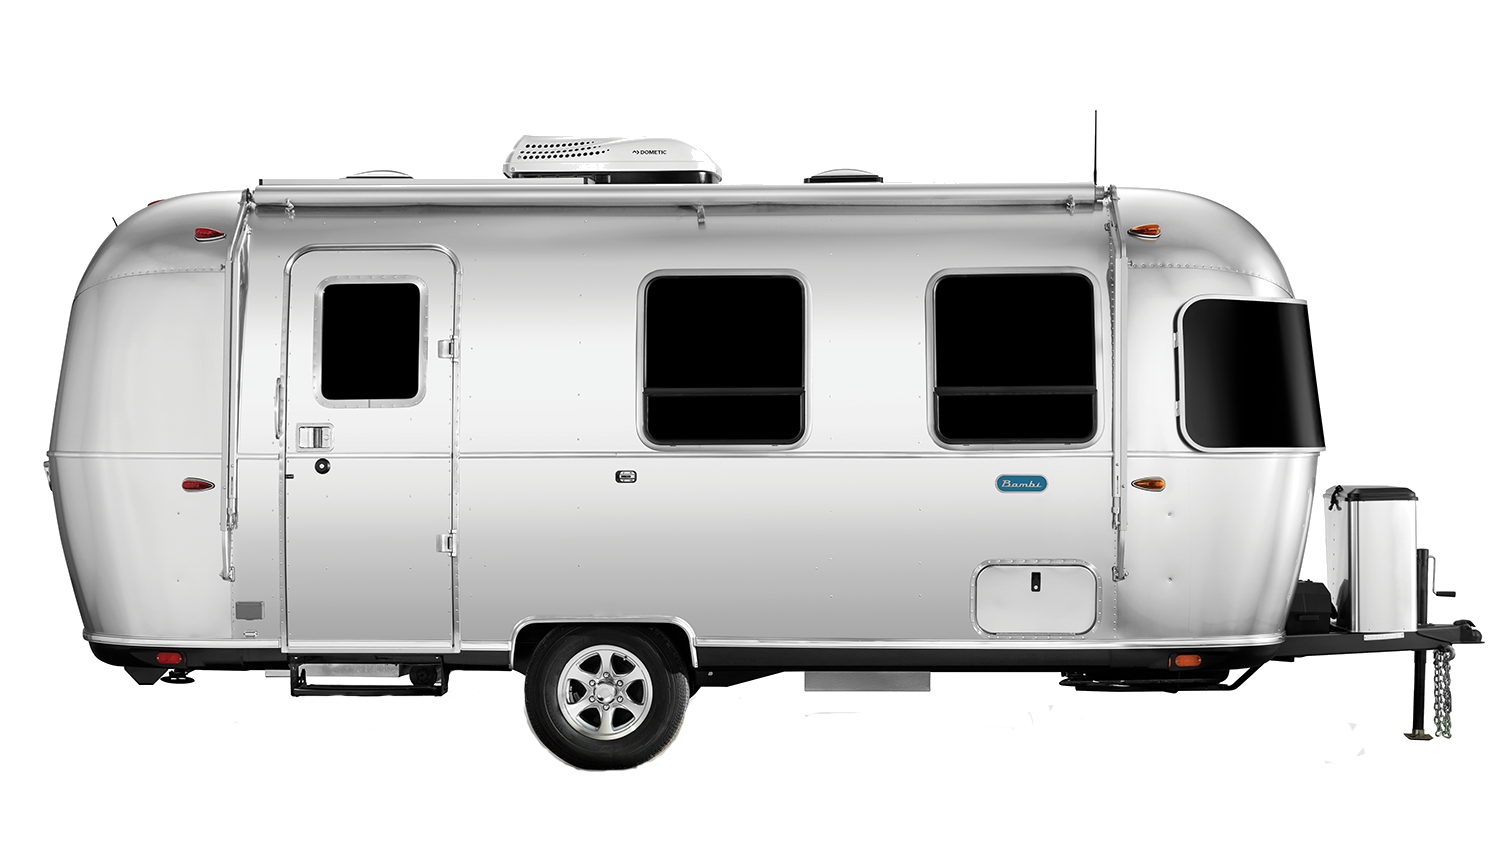 Visit Airstream of Nashua to check out the Airstream Bambi travel trailer today!